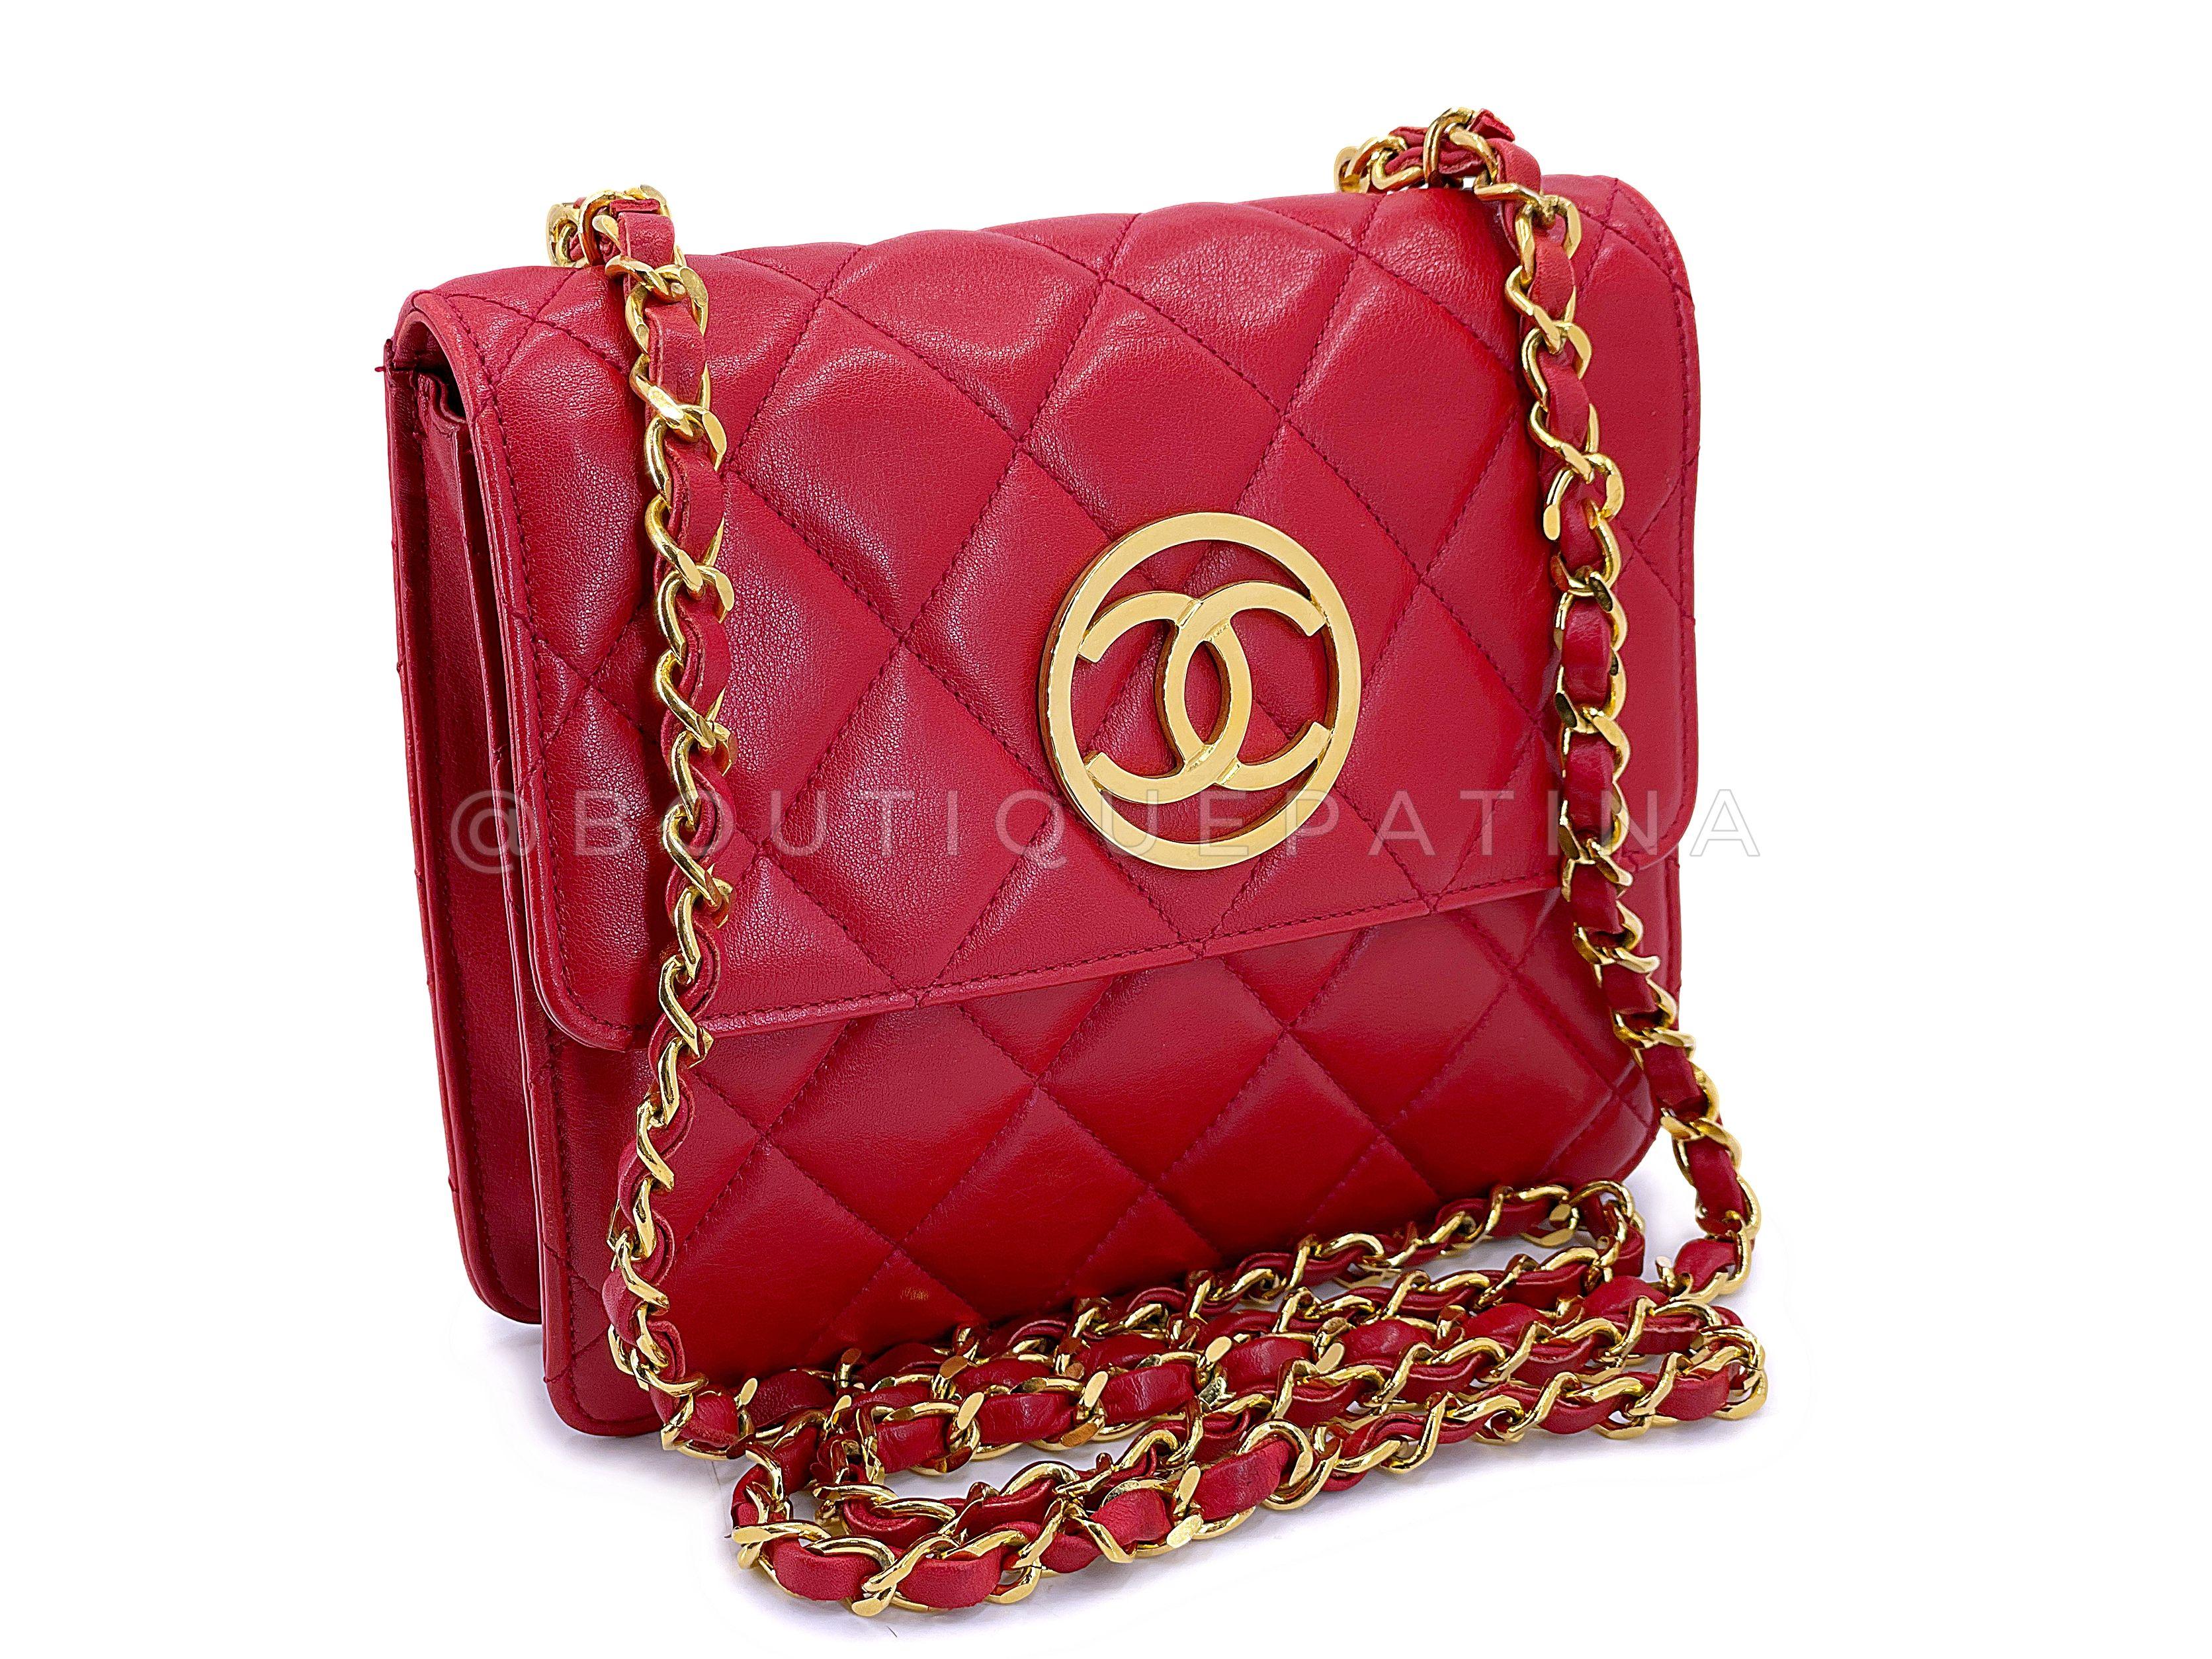 Store item: 67768
This Chanel 1991 Vintage Red Encircled CC Mini Flap Bag 24k GHW is a perfect crossbody in the size of a classic square mini flap.

A 24k gold plated encircled CC logo on front, quilted red lambskin leather back panels, back